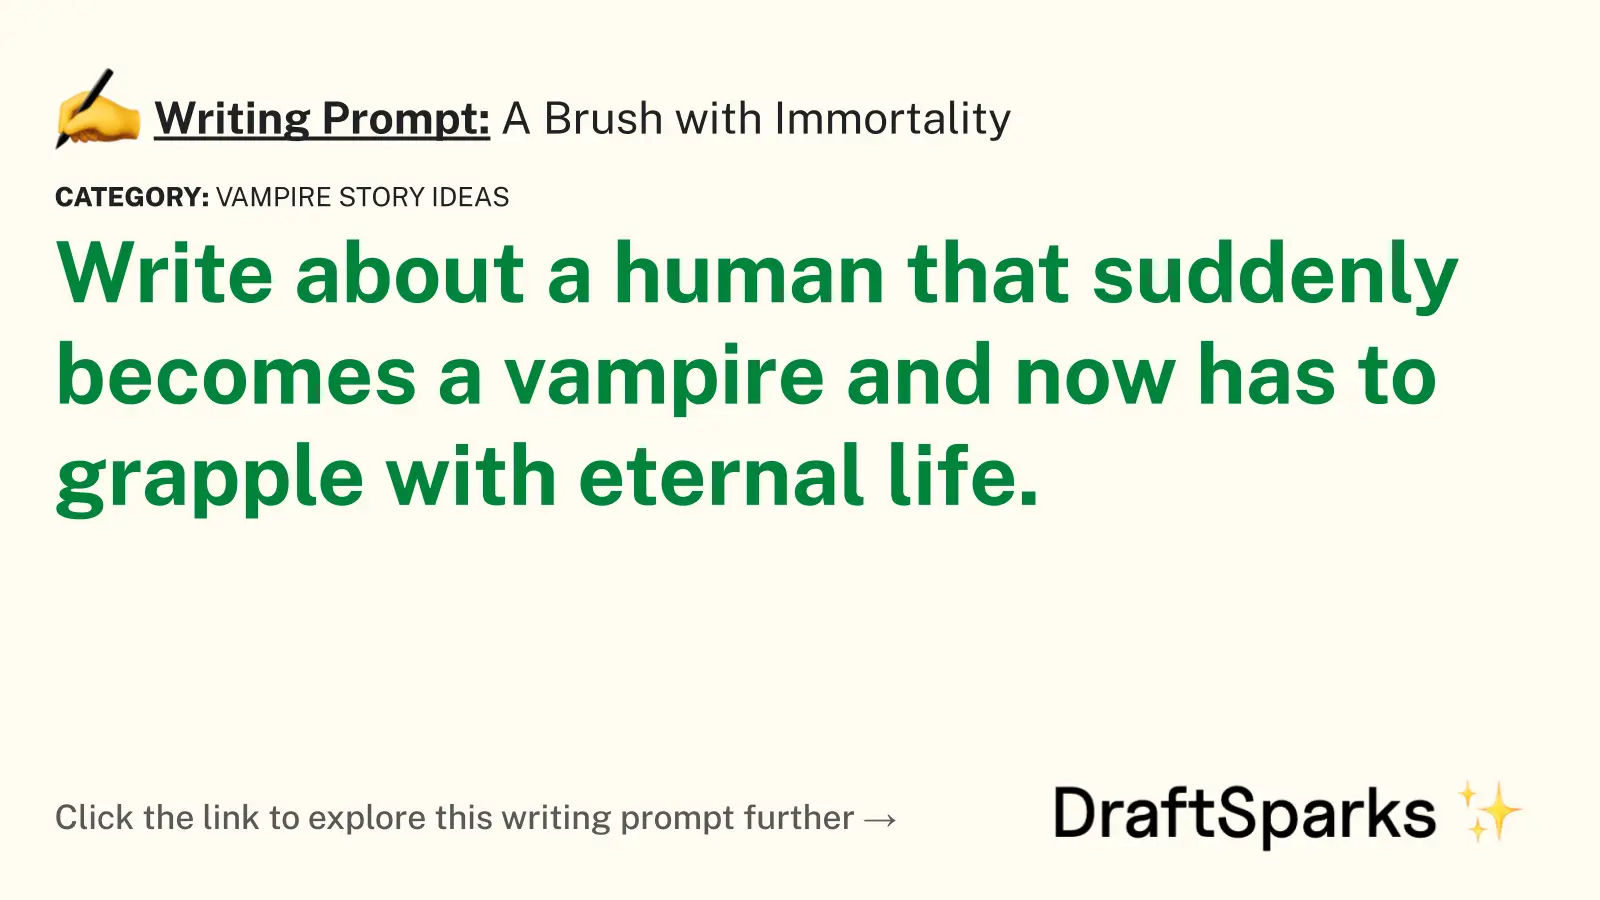 A Brush with Immortality